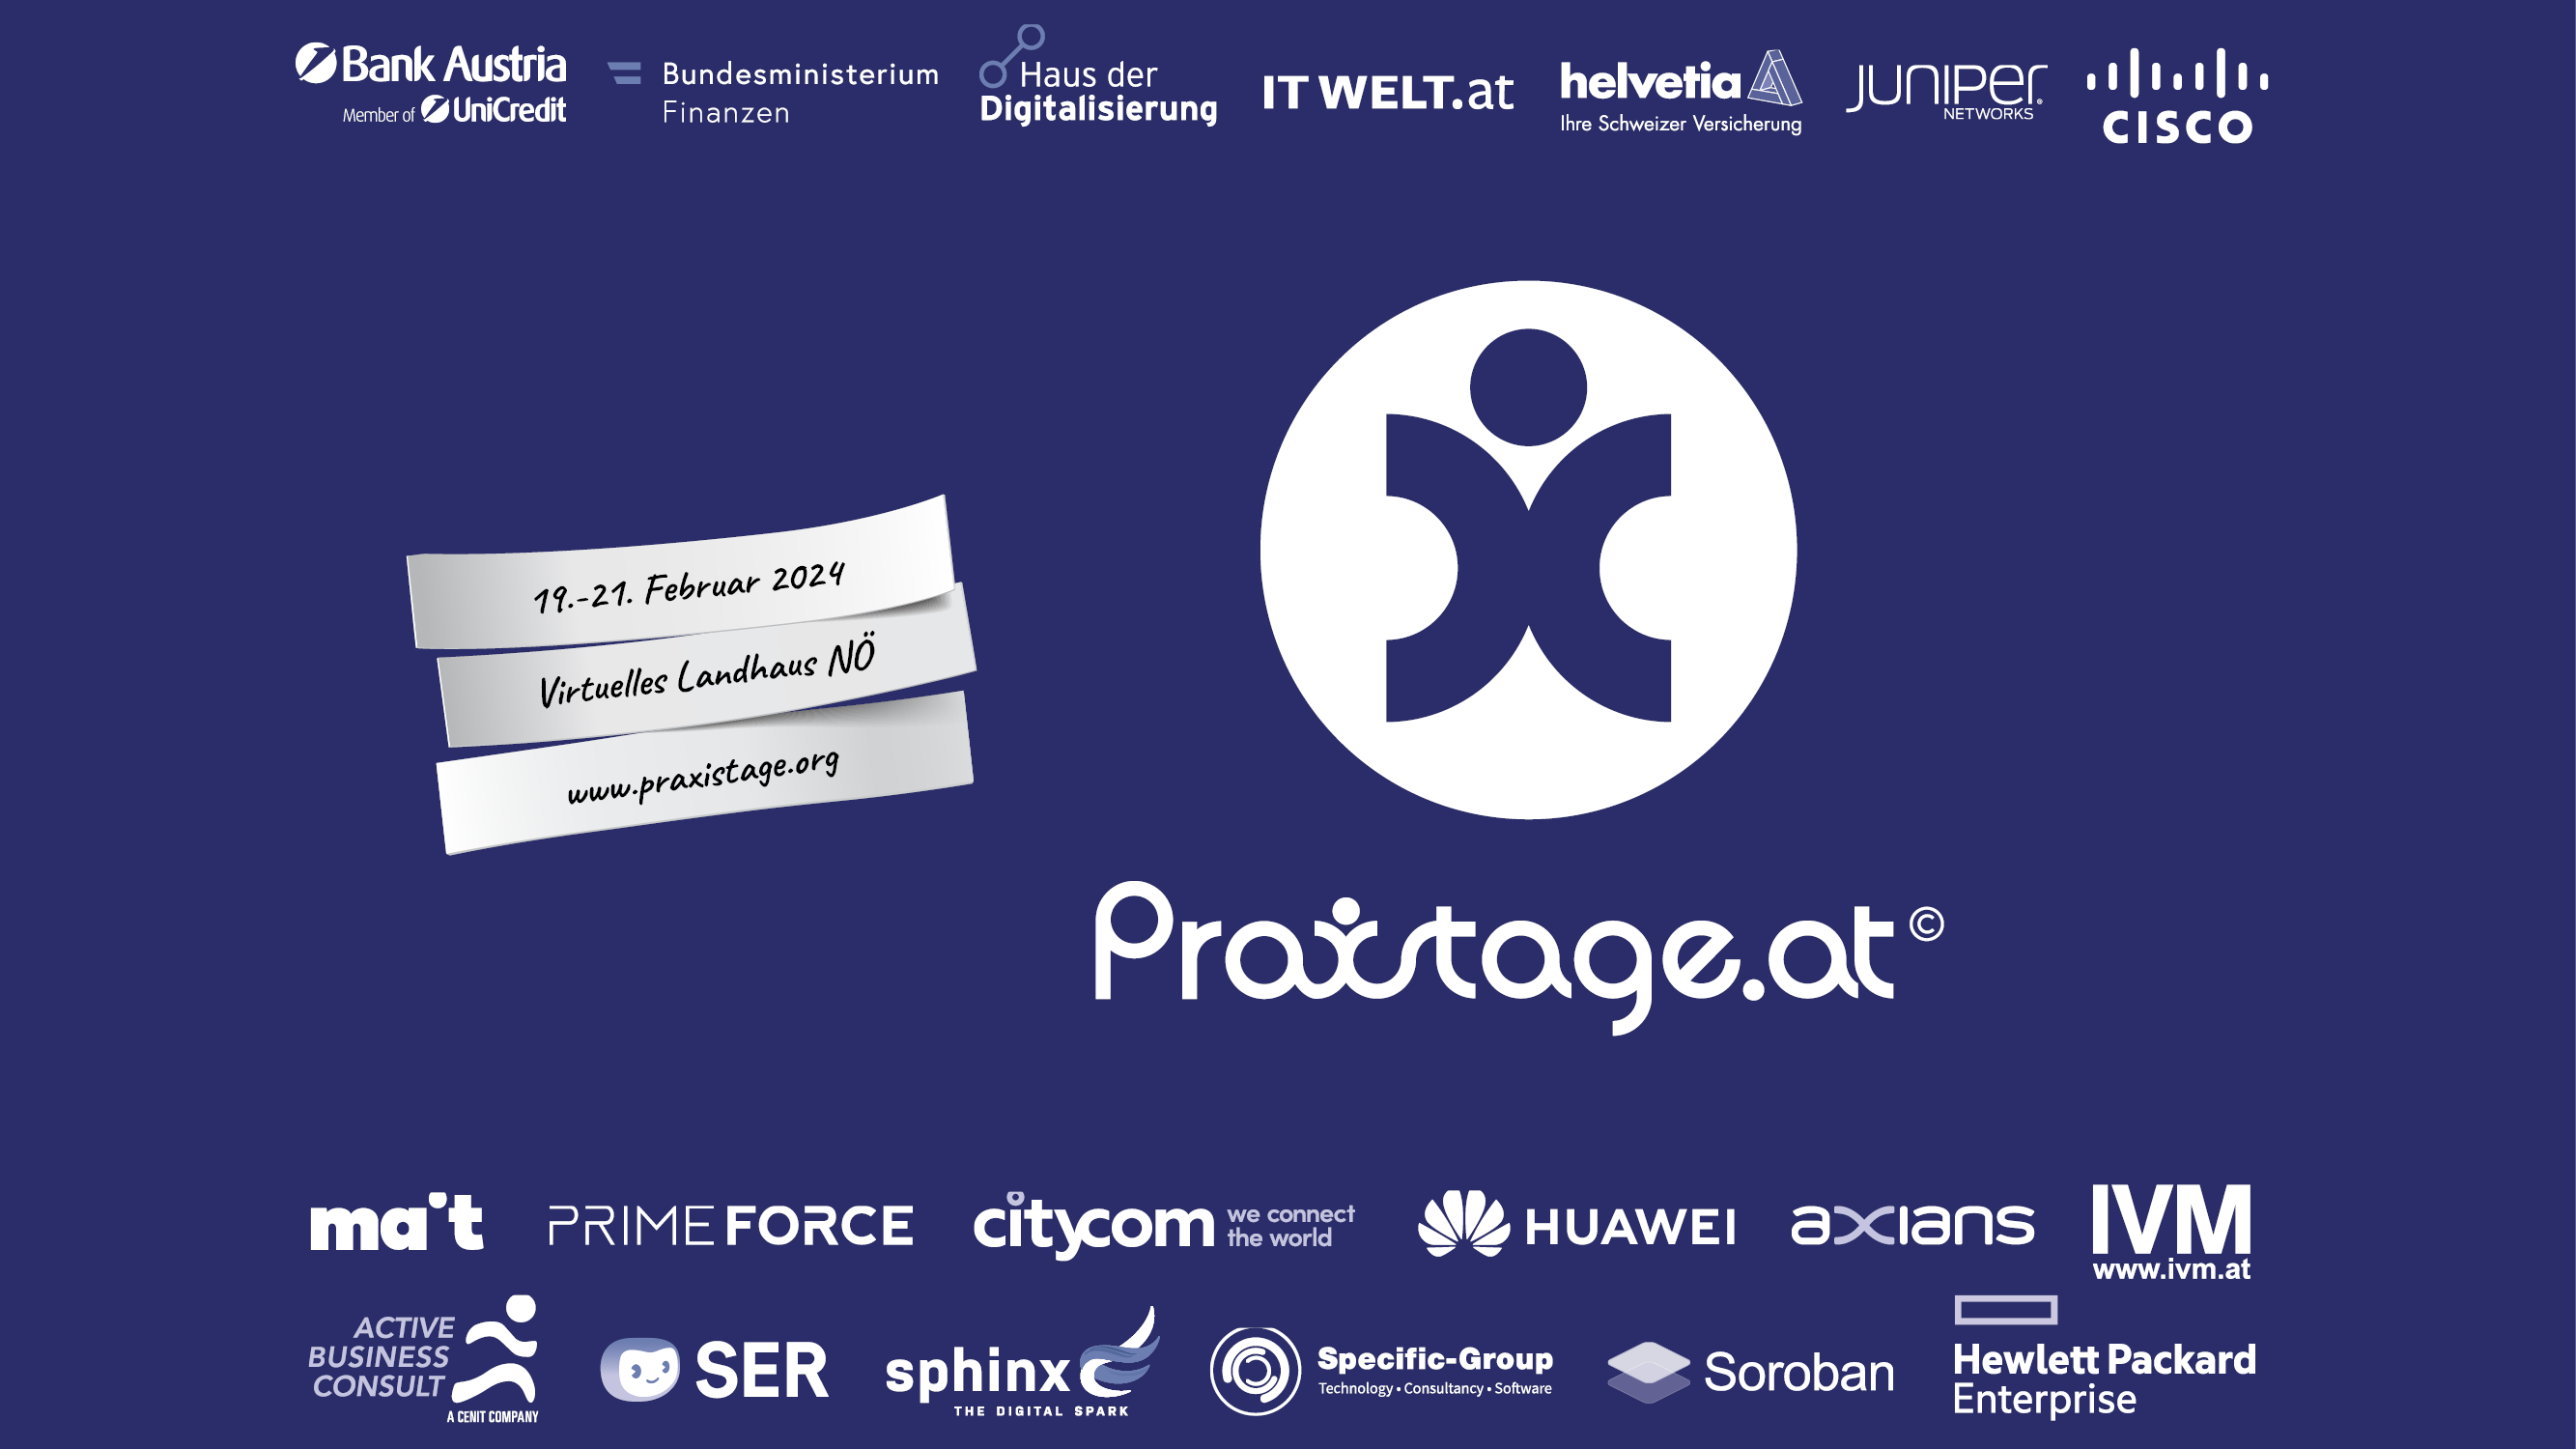 Praxistage.org